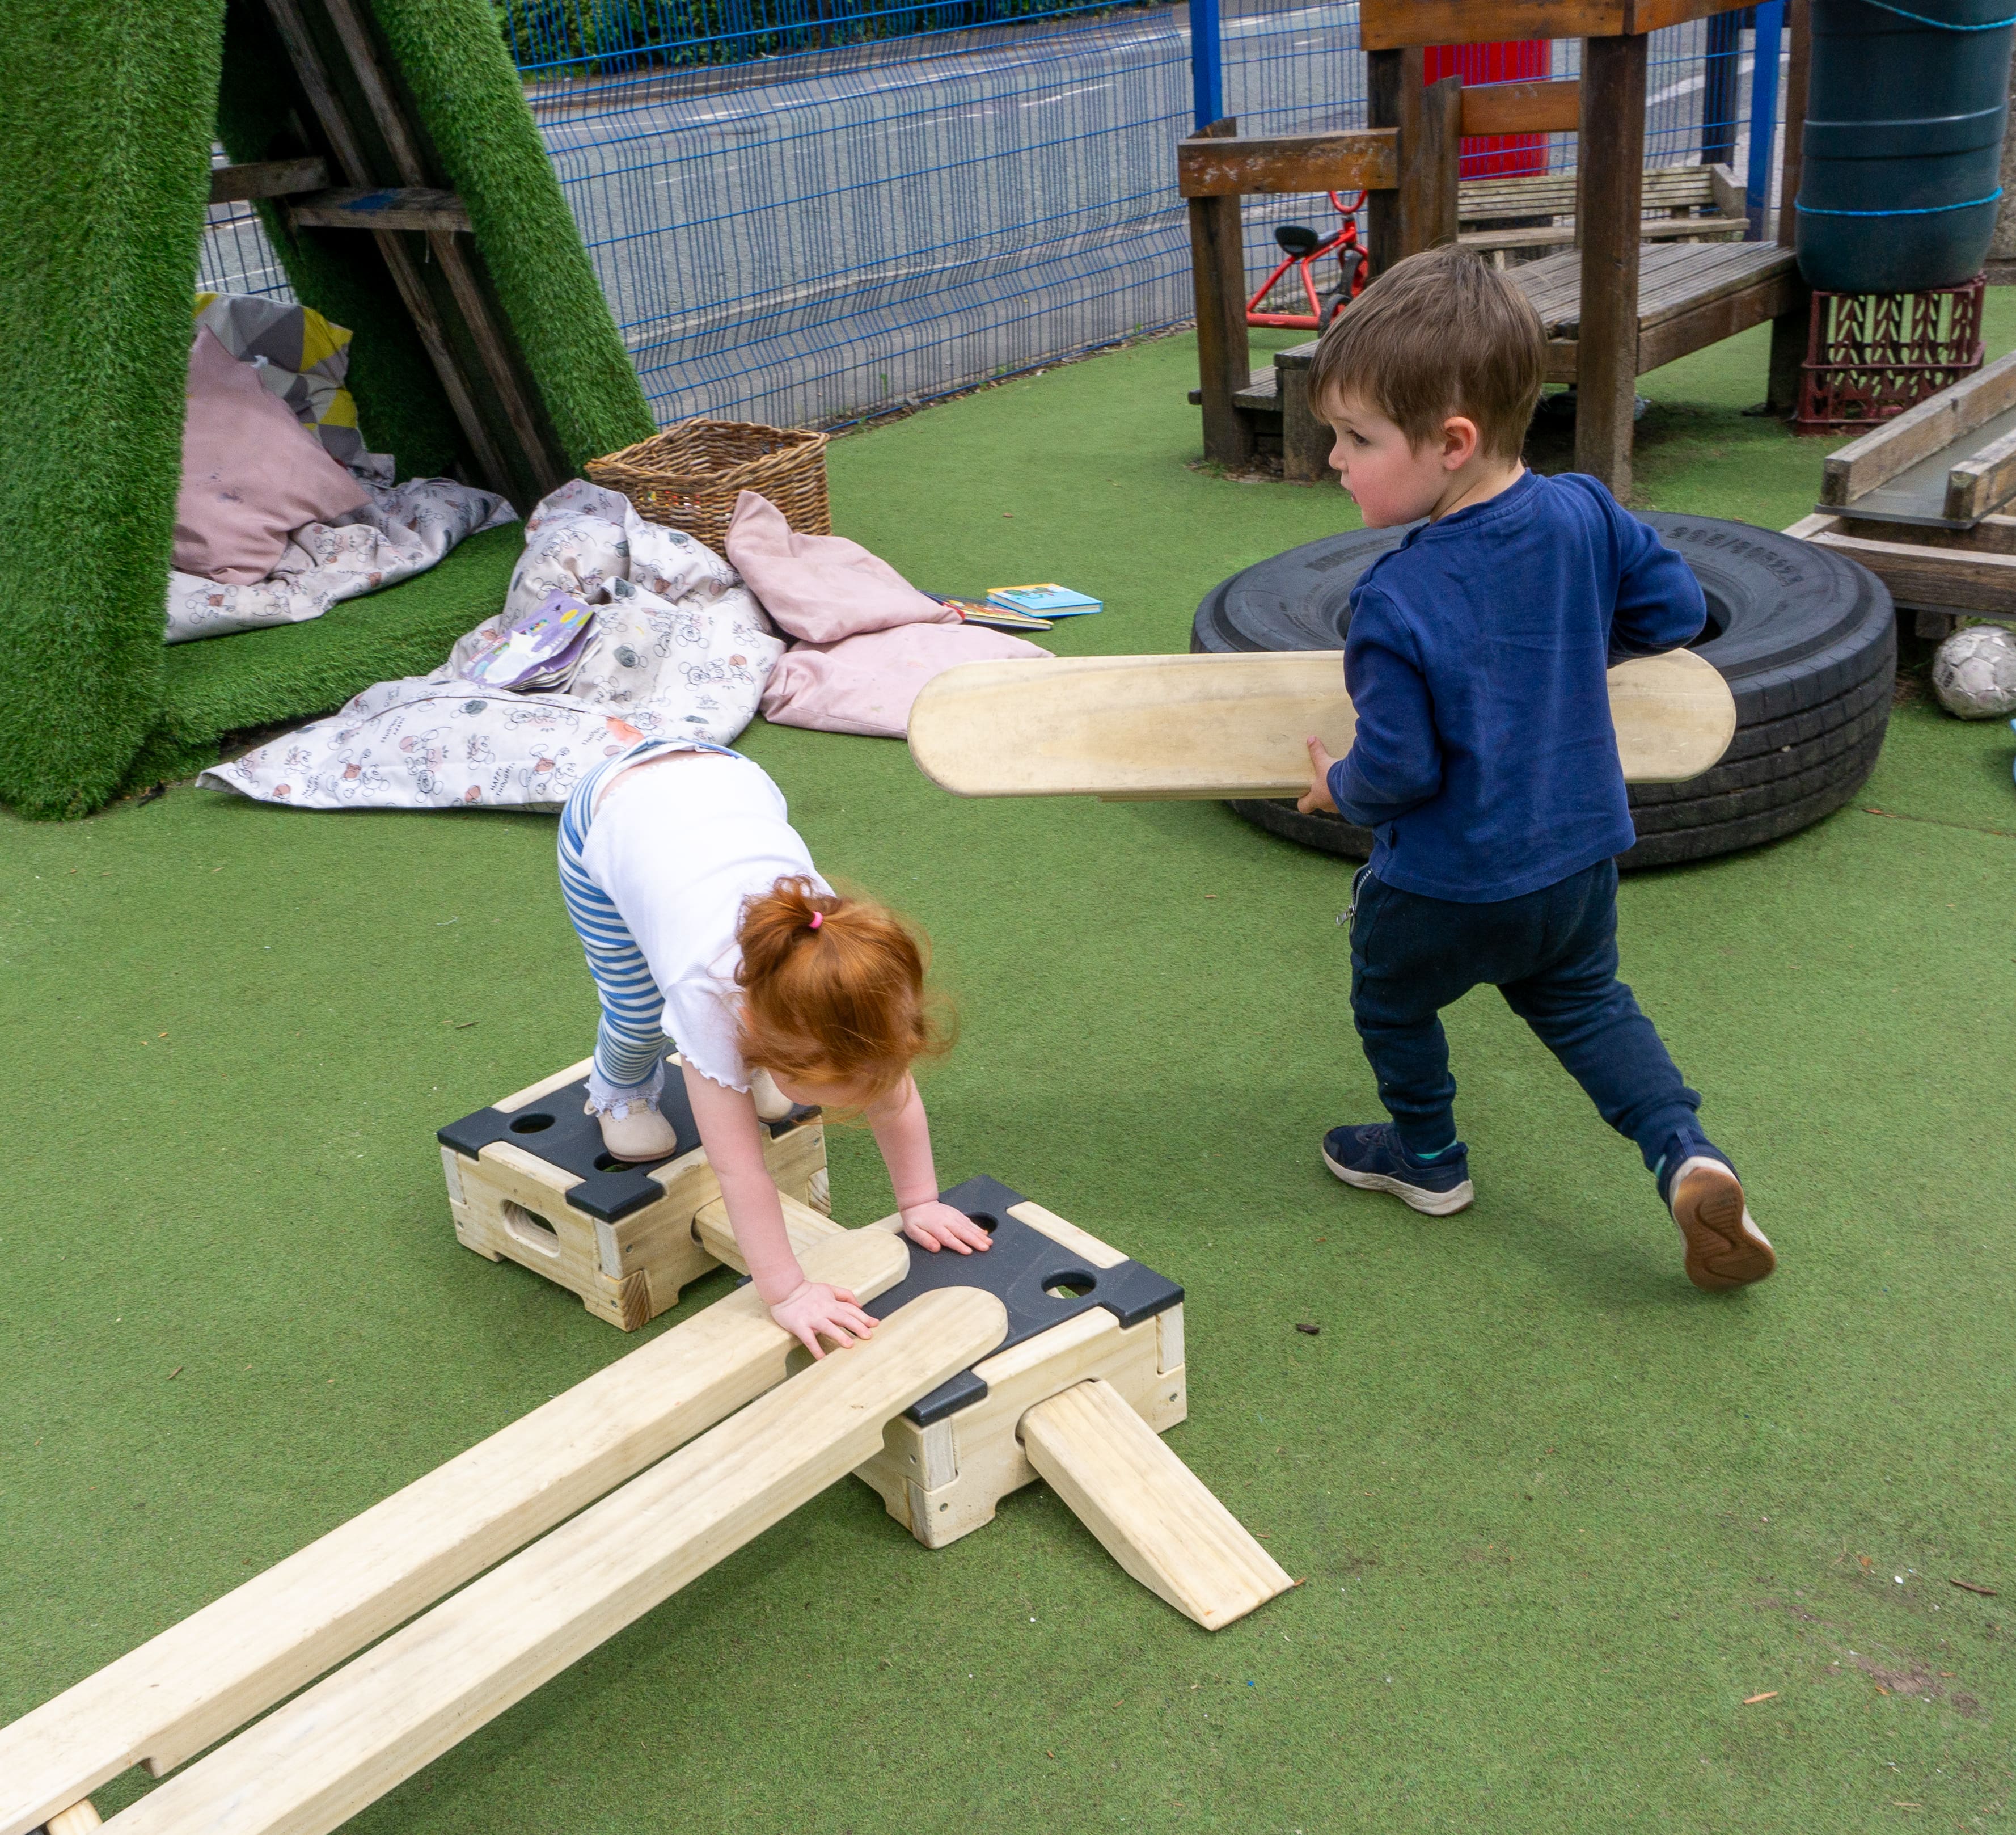 A boy is holding a plank from the Play Builder Apprentice set as he walks around a little girl stood on a Play Builder block. The little girl is bending over as she puts her hands on one block, whilst keeping her feet on another,